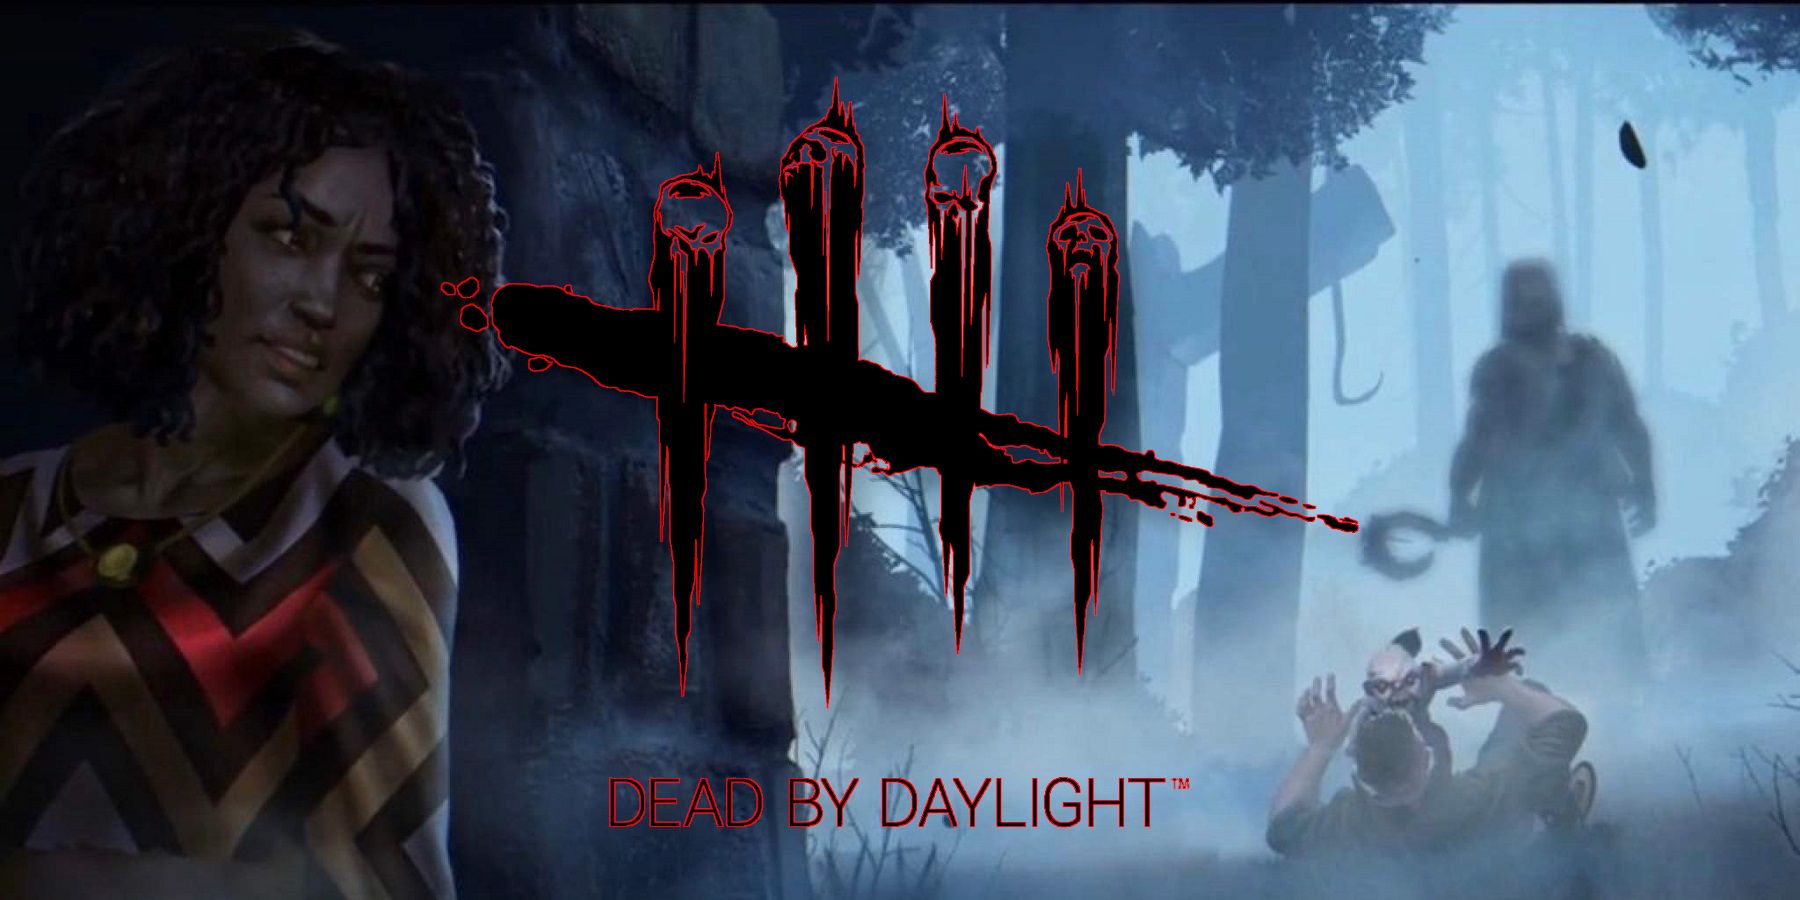 Image of a woman hiding from a killer with the Dead by Daylight logo in the center.